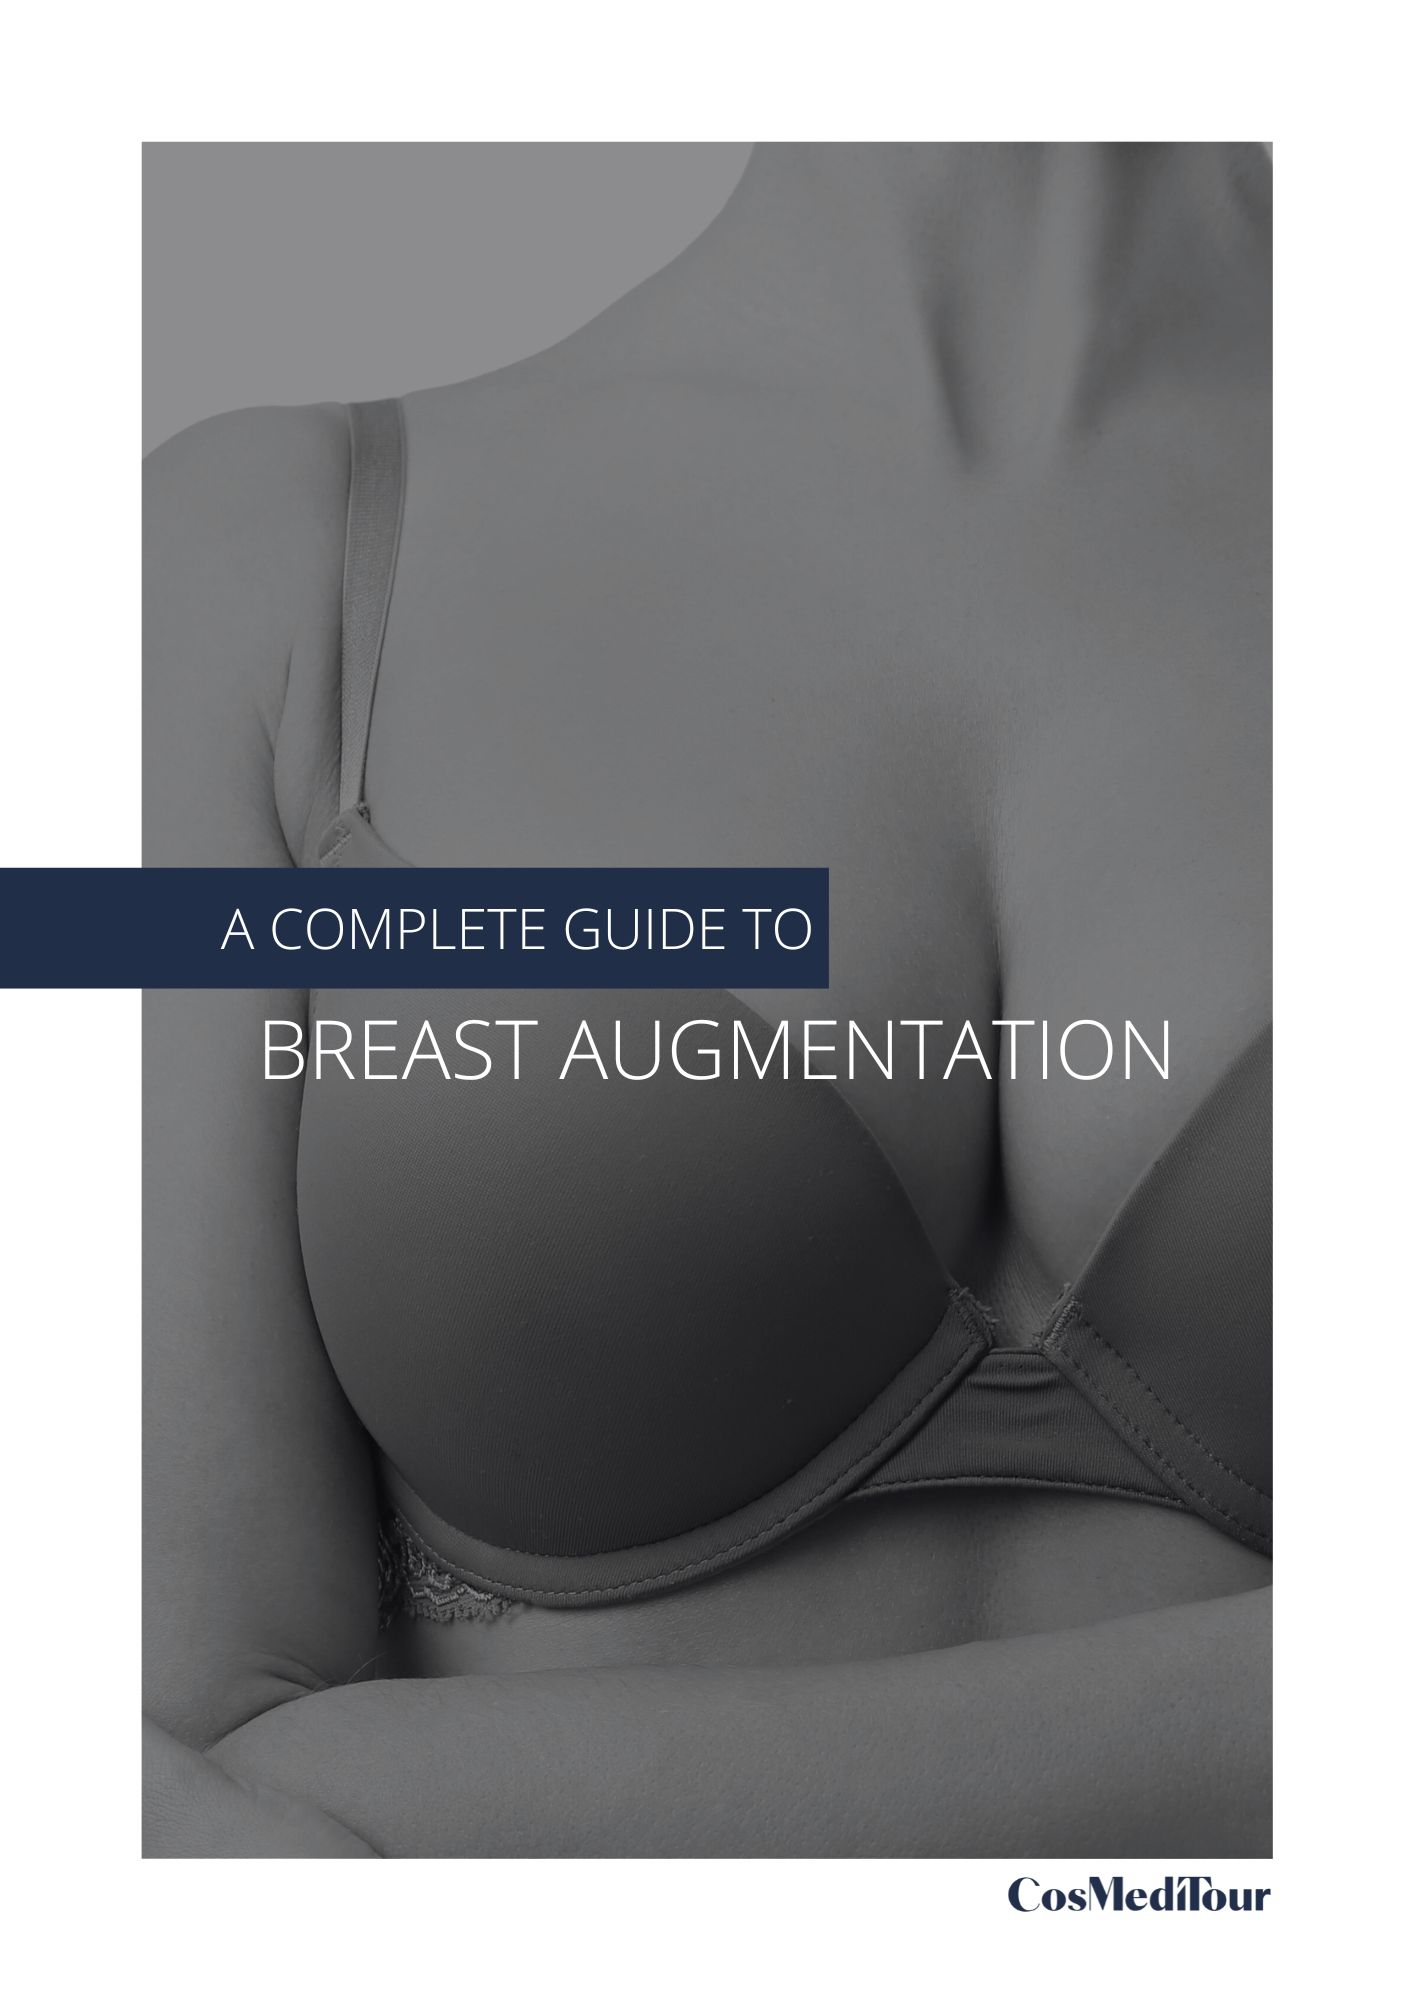 Your Guide to Breast Augmentation